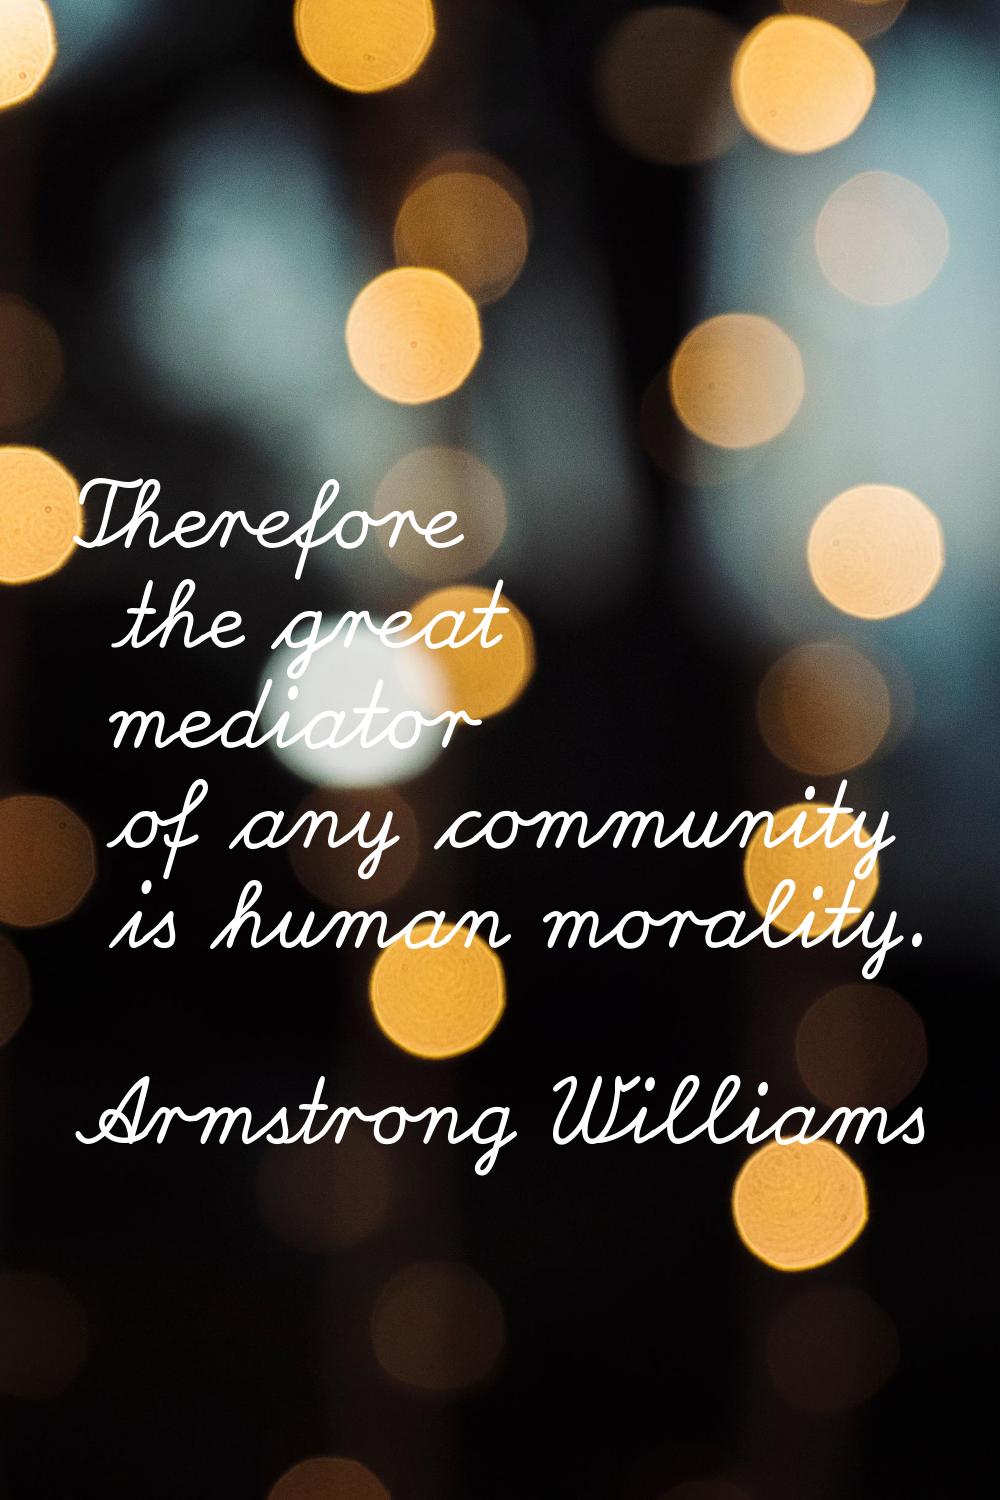 Therefore the great mediator of any community is human morality.